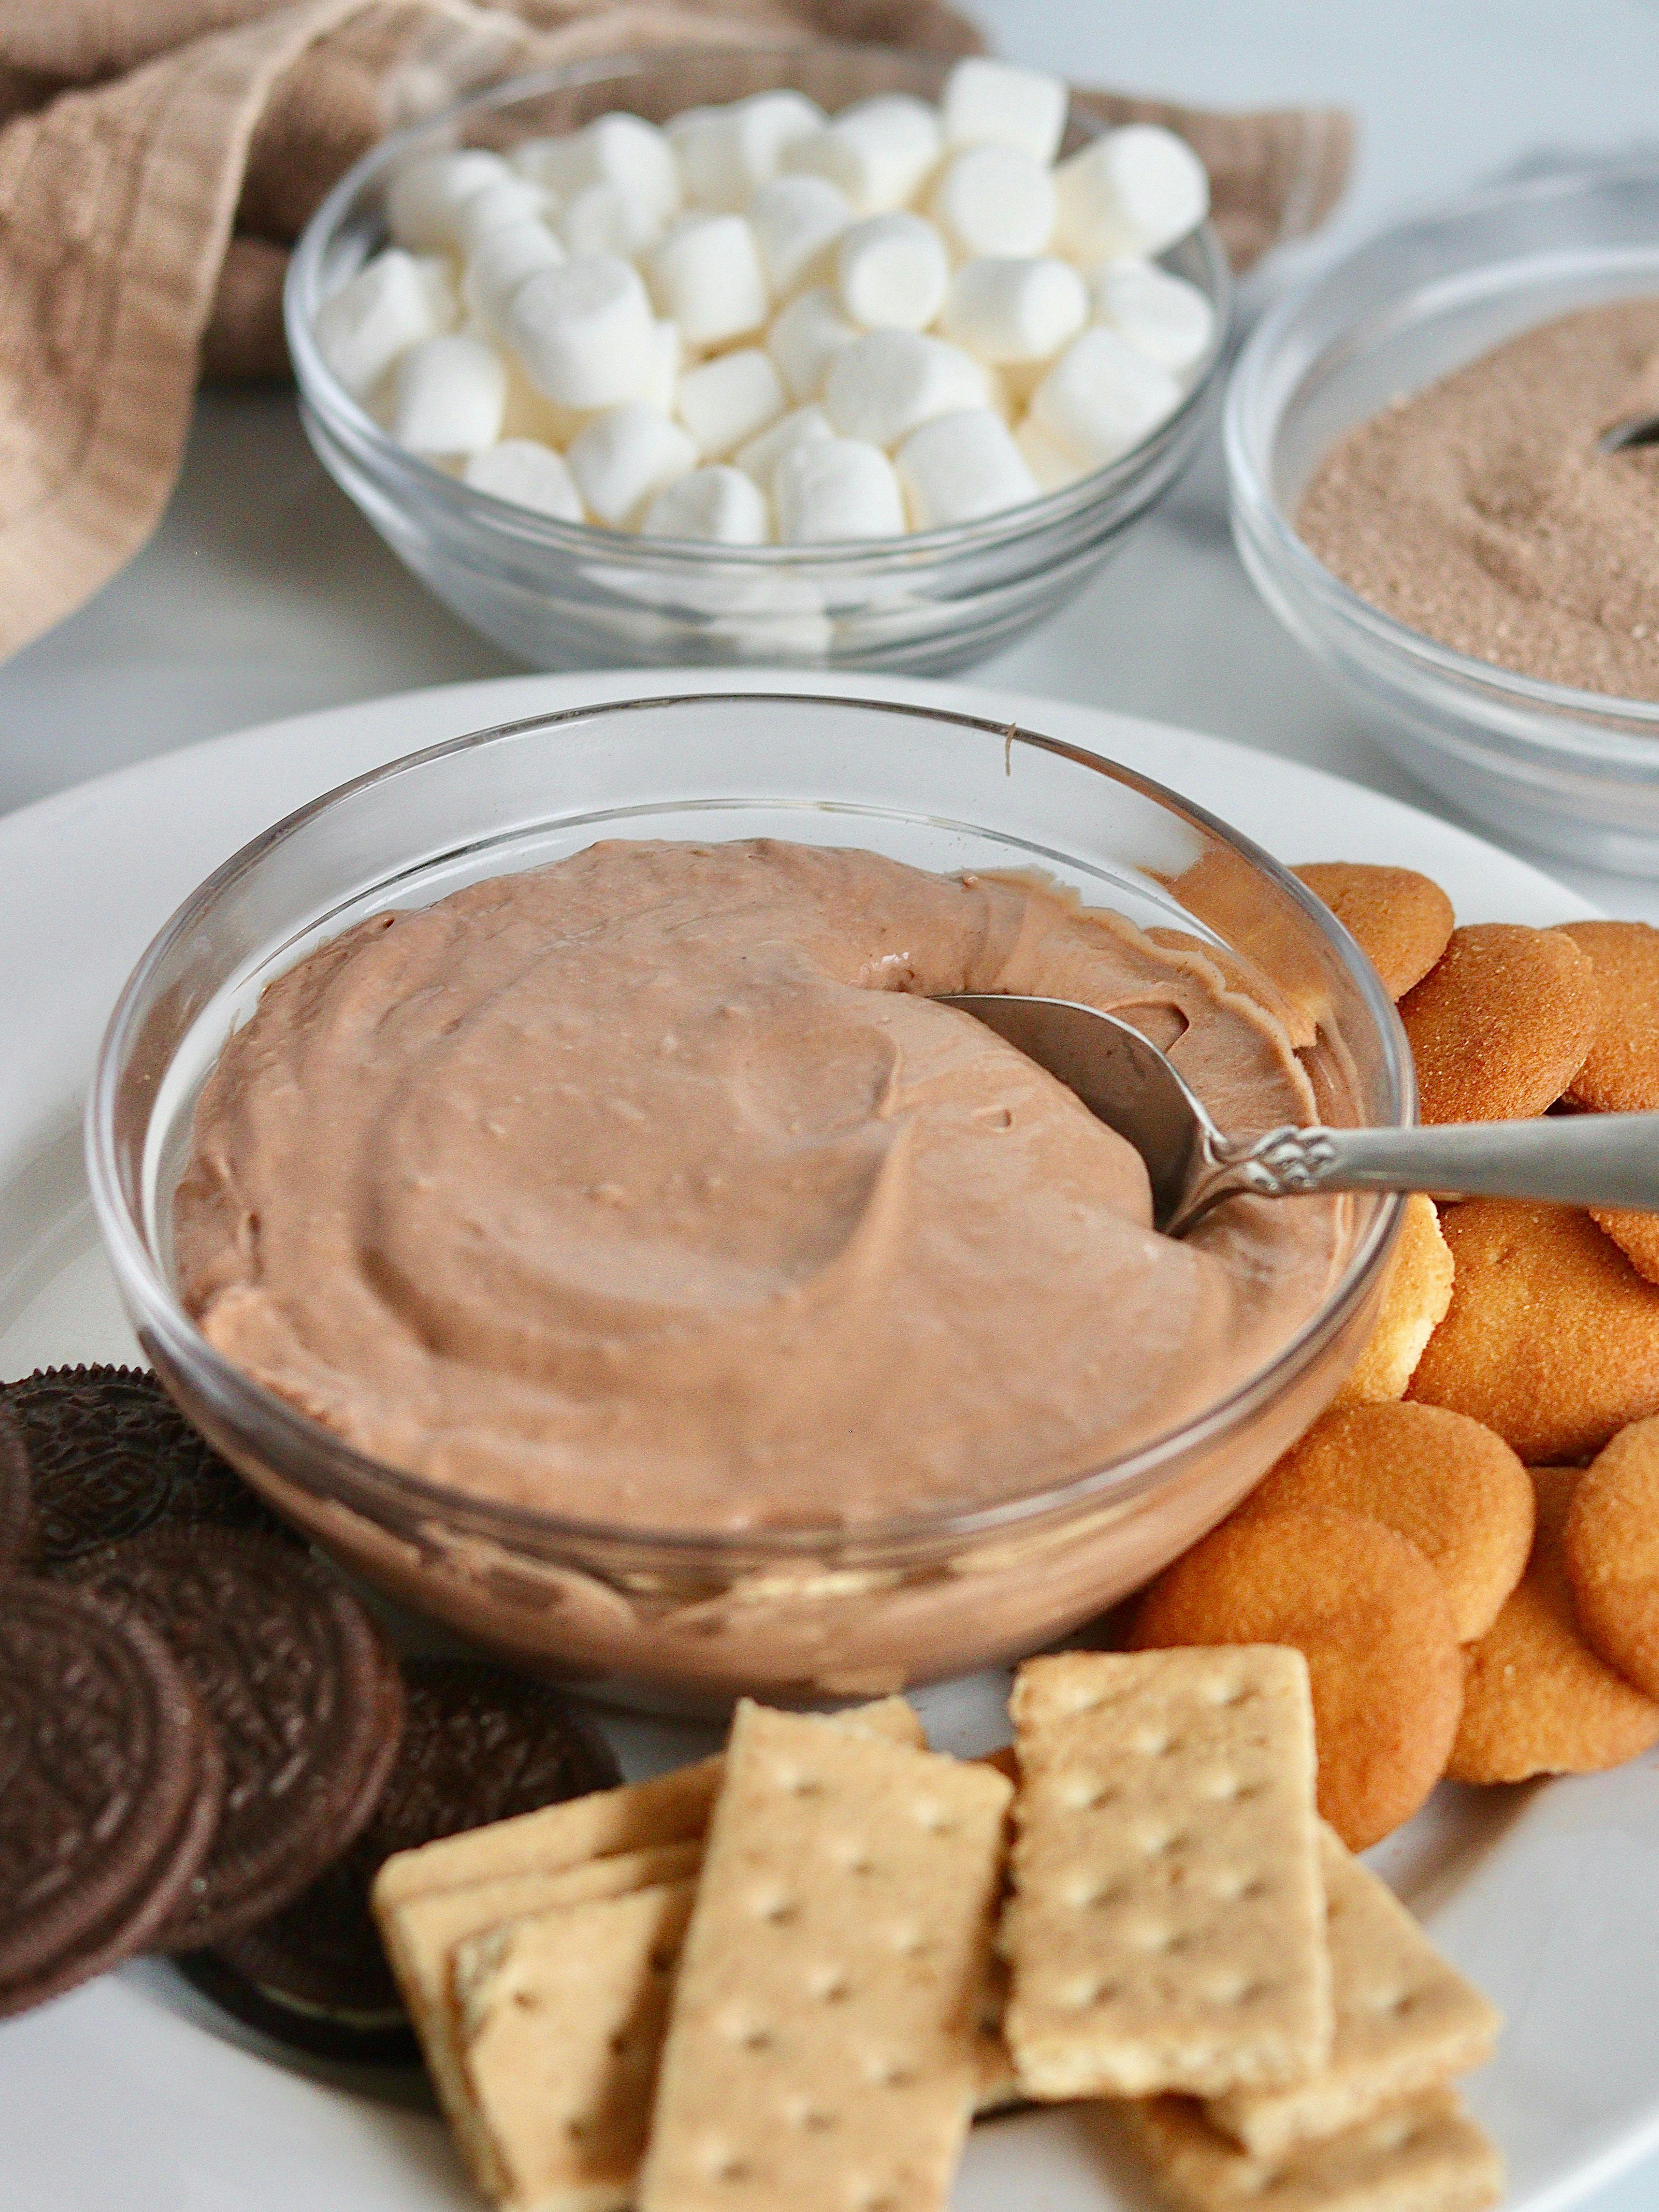 Hot chocolate dip on a plate with cookies, wafers and marshmallows.